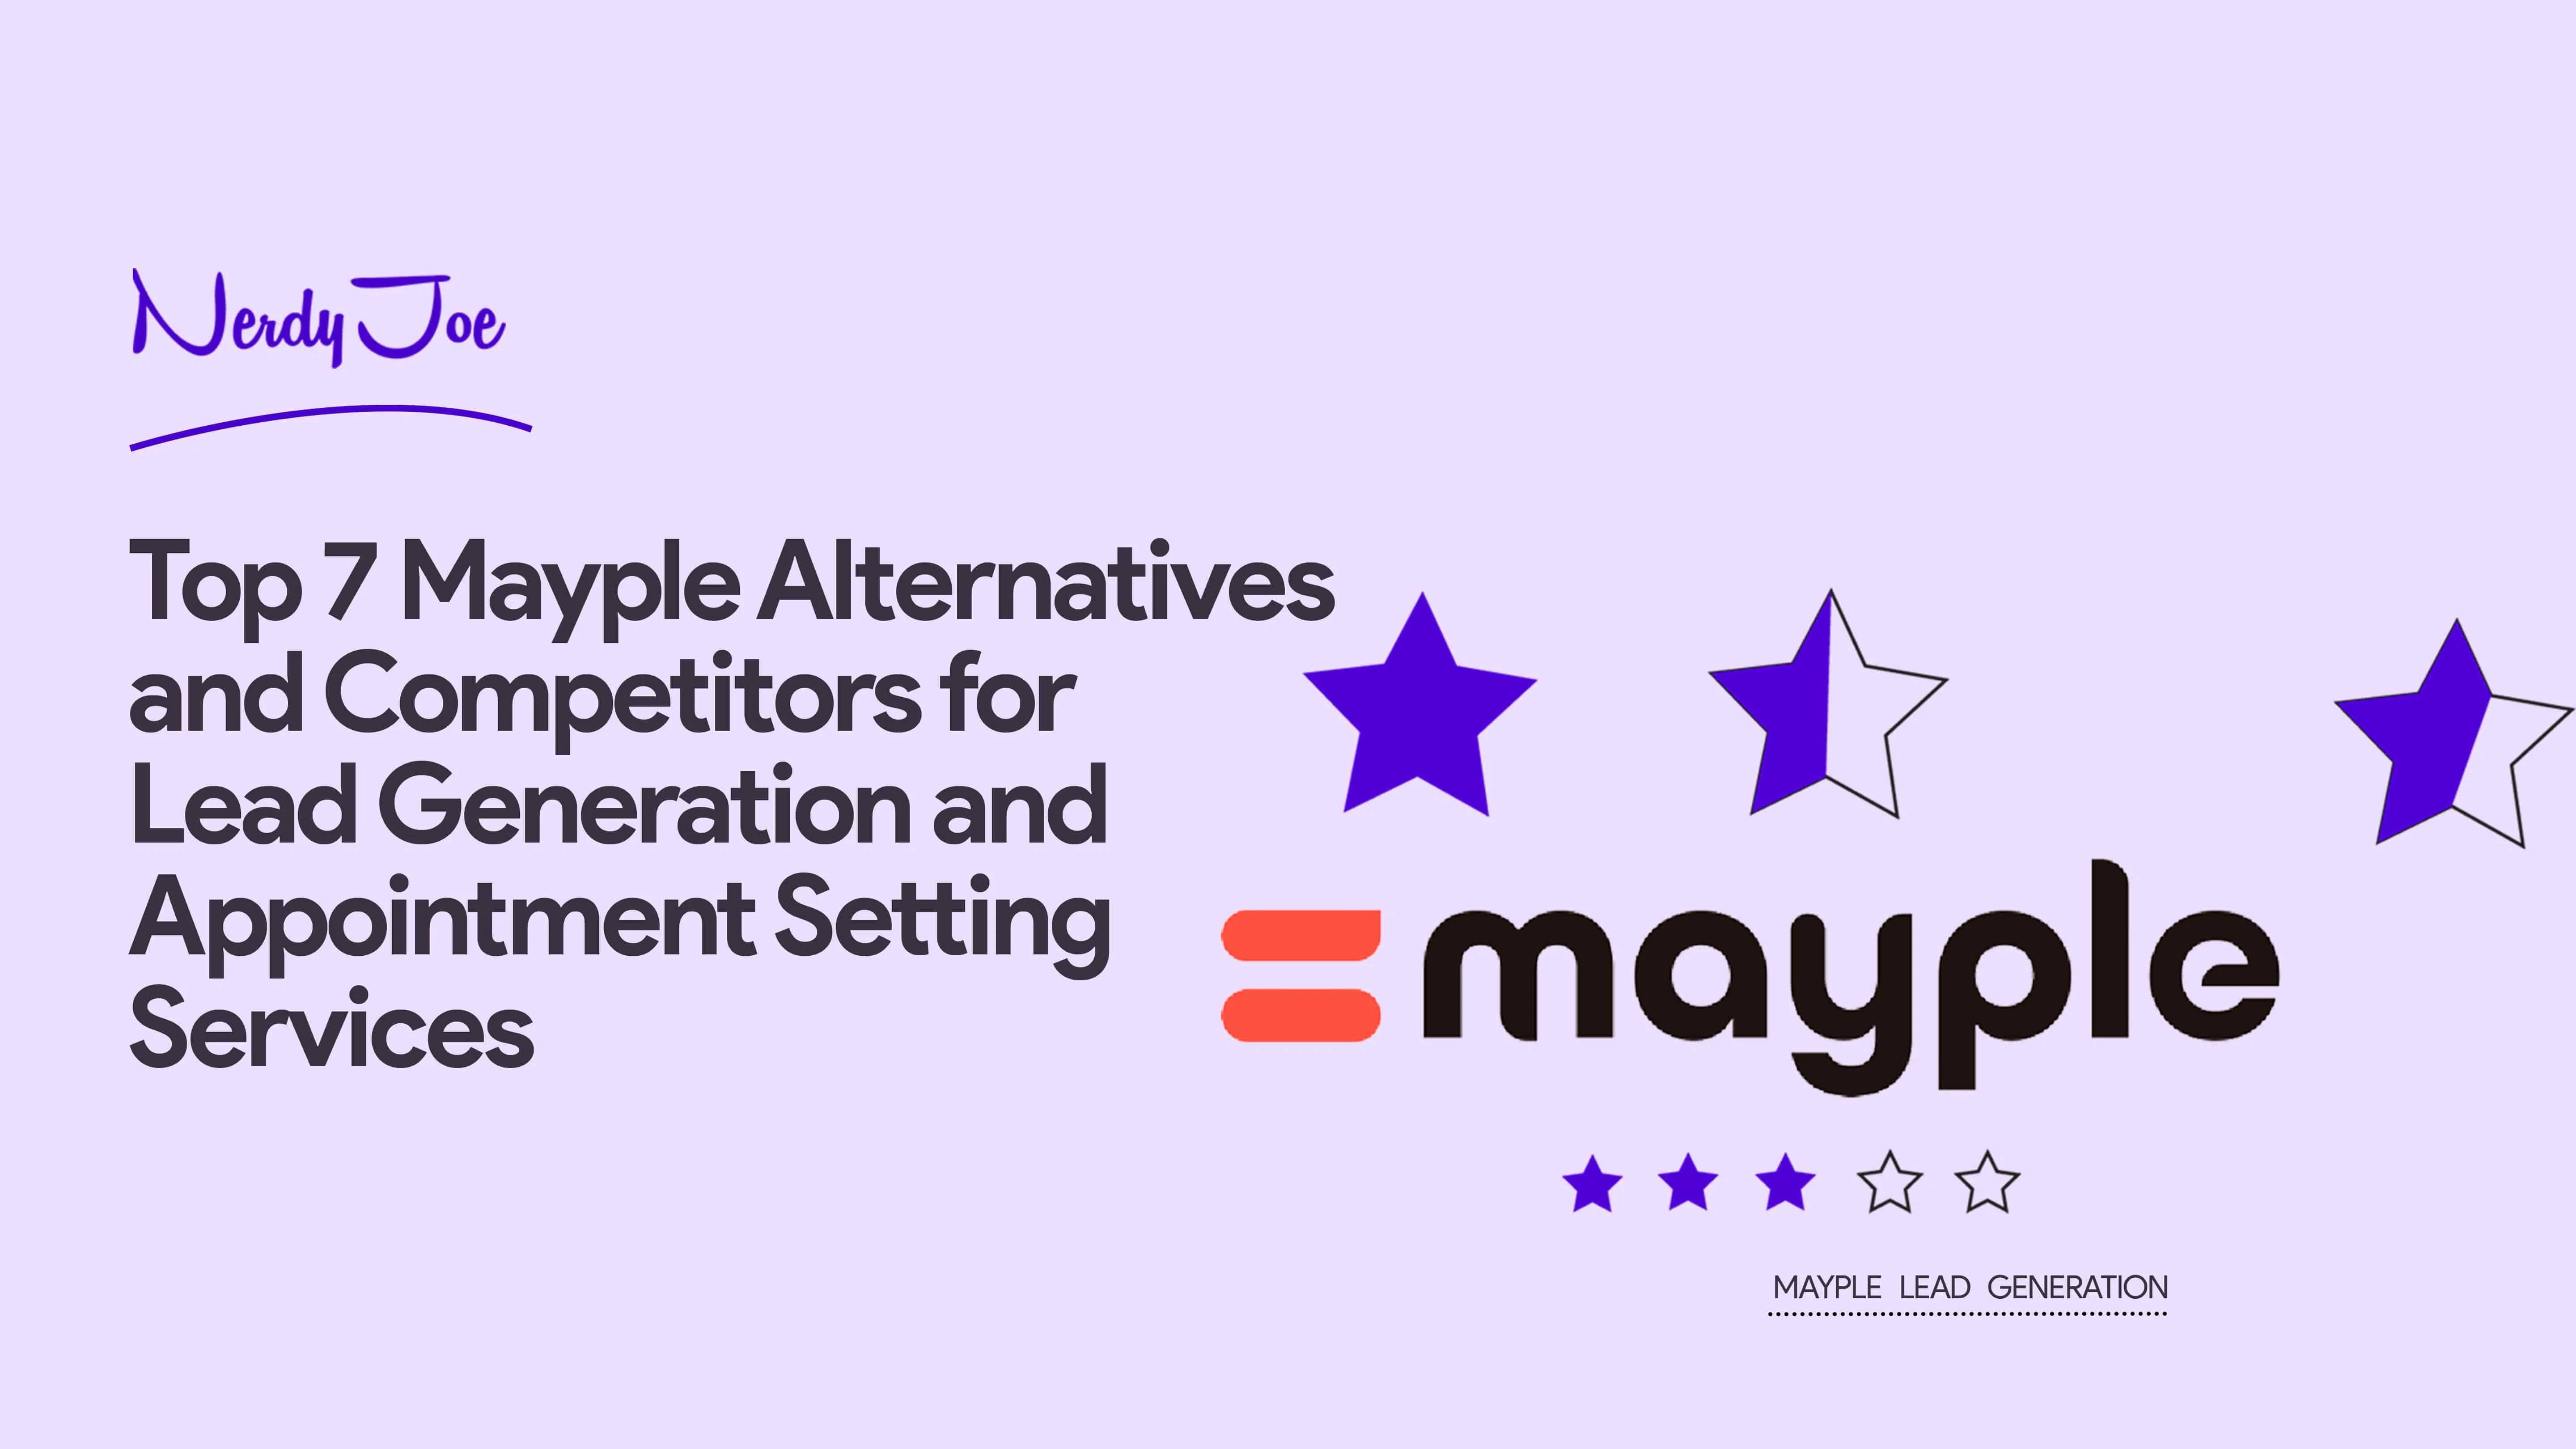 Top 7 Mayple Alternatives and Competitors for Lead Generation